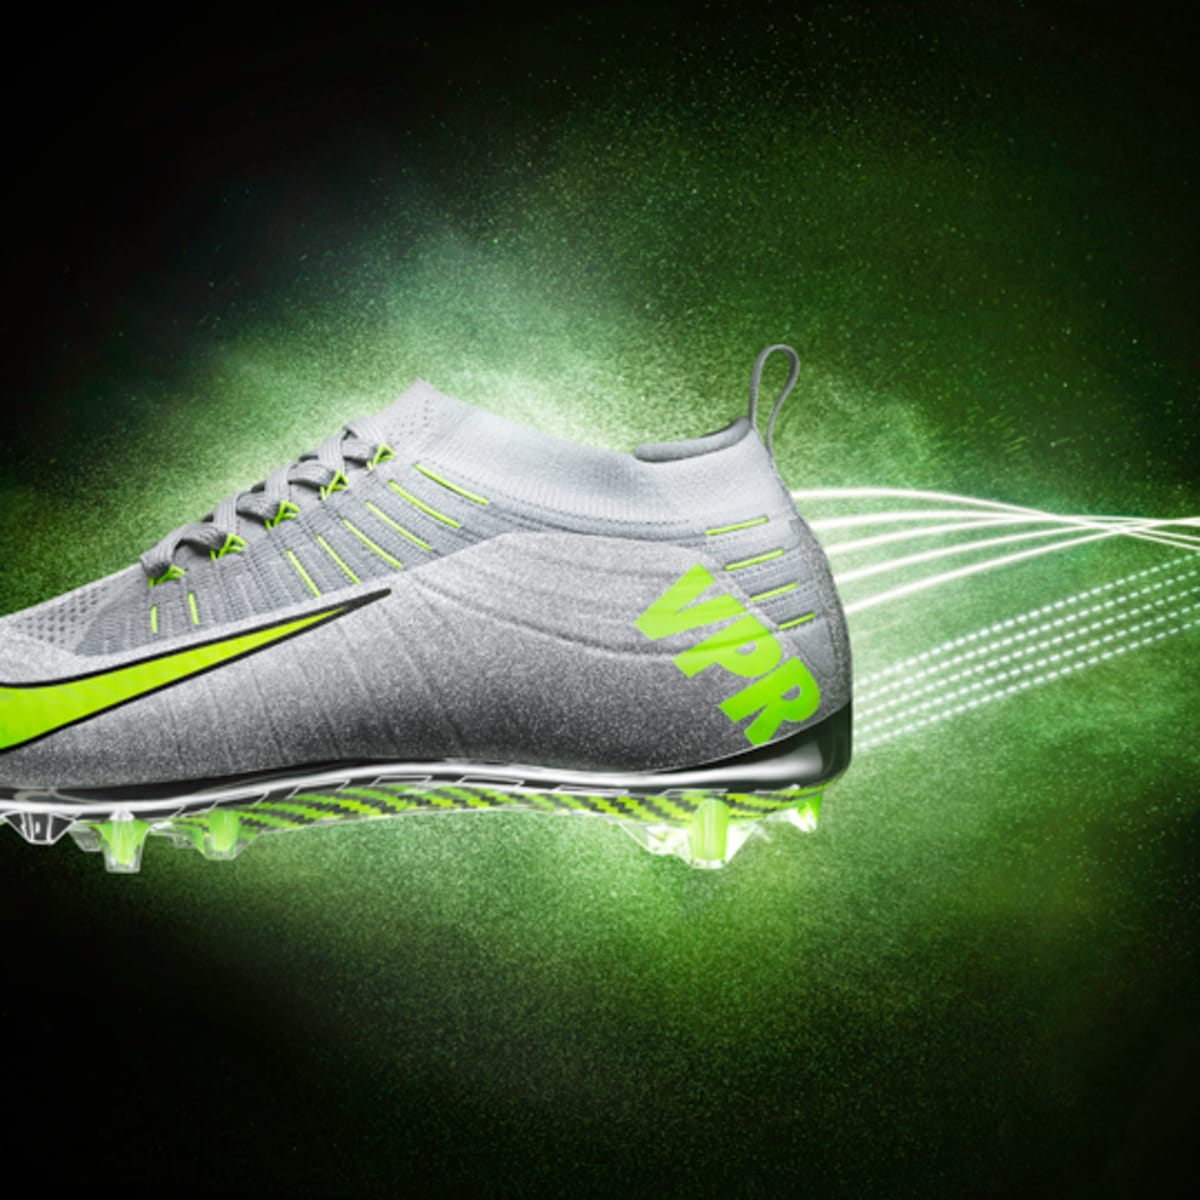 Nike Launches Flyknit Football Cleats with Dynamic Carbon Plate